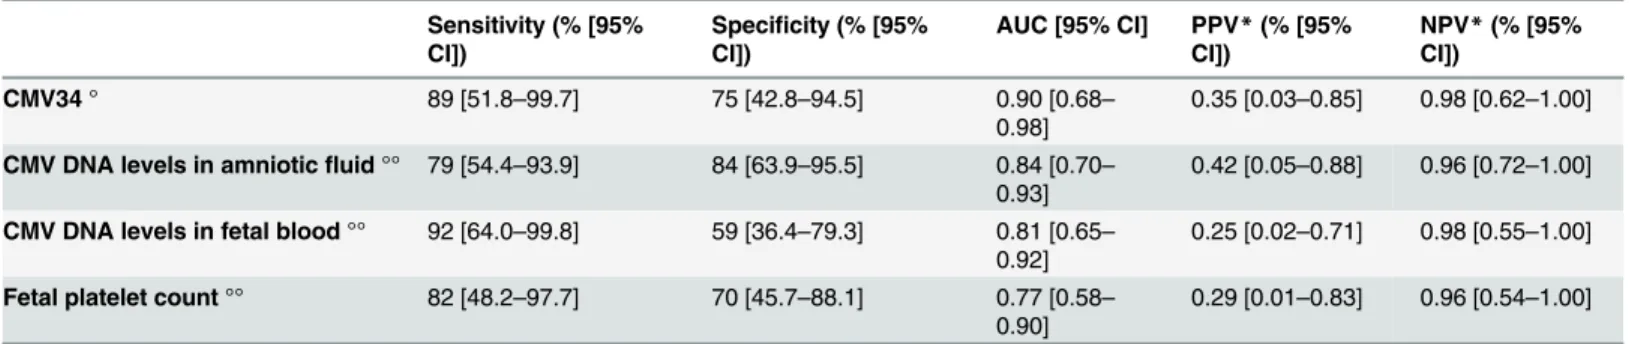 Table 5. Sensitivity, specificity, AUC, positive predictive value (PPV) and negative predictive value (NPV) of CMV34 and other clinical parameters associated to postnatal outcome.